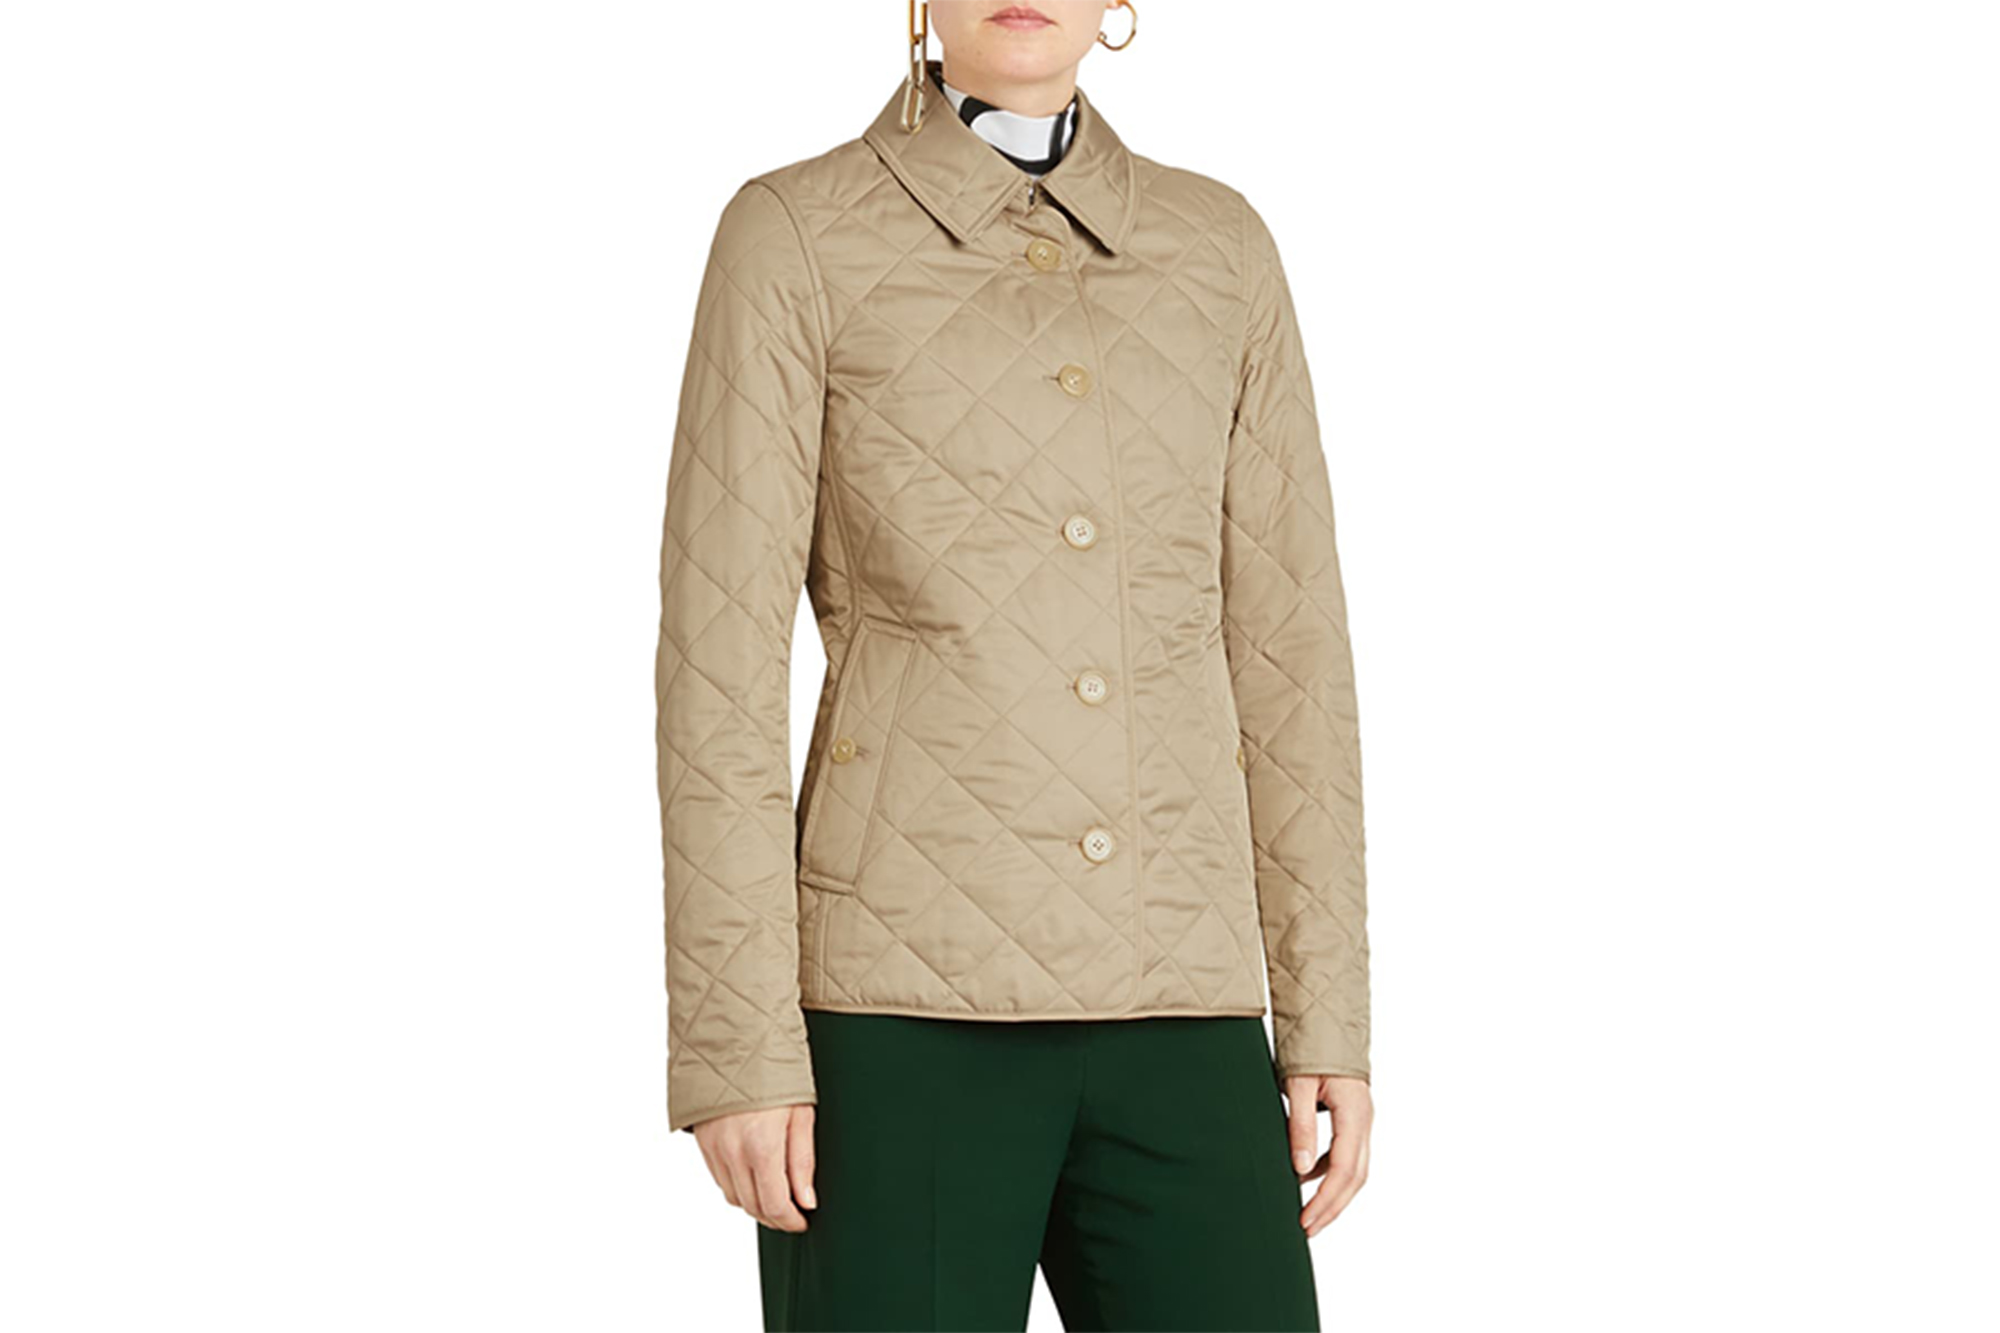 Scoop Up This Burberry Jacket That's 30% off Before it Sells Out!